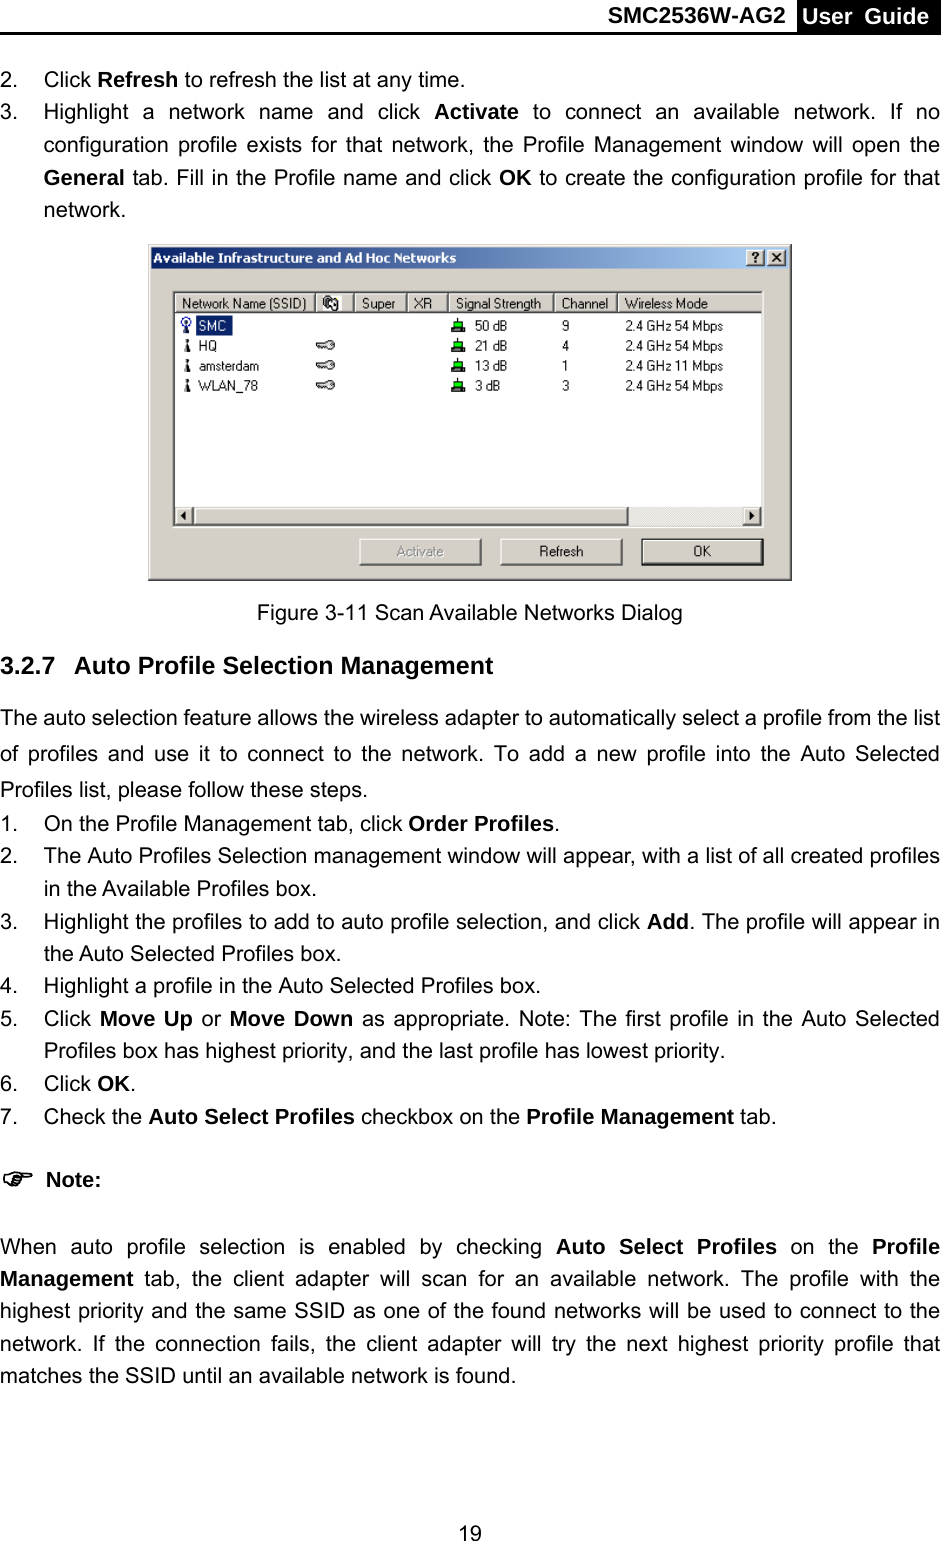 SMC2536W-AG2  User Guide   192. Click Refresh to refresh the list at any time. 3.  Highlight a network name and click Activate to connect an available network. If no configuration profile exists for that network, the Profile Management window will open the General tab. Fill in the Profile name and click OK to create the configuration profile for that network.  Figure 3-11 Scan Available Networks Dialog 3.2.7  Auto Profile Selection Management The auto selection feature allows the wireless adapter to automatically select a profile from the list of profiles and use it to connect to the network. To add a new profile into the Auto Selected Profiles list, please follow these steps. 1.  On the Profile Management tab, click Order Profiles. 2.  The Auto Profiles Selection management window will appear, with a list of all created profiles in the Available Profiles box. 3.  Highlight the profiles to add to auto profile selection, and click Add. The profile will appear in the Auto Selected Profiles box. 4.  Highlight a profile in the Auto Selected Profiles box. 5. Click Move Up or Move Down as appropriate. Note: The first profile in the Auto Selected Profiles box has highest priority, and the last profile has lowest priority. 6. Click OK. 7. Check the Auto Select Profiles checkbox on the Profile Management tab. ) Note: When auto profile selection is enabled by checking Auto Select Profiles on the Profile Management tab, the client adapter will scan for an available network. The profile with the highest priority and the same SSID as one of the found networks will be used to connect to the network. If the connection fails, the client adapter will try the next highest priority profile that matches the SSID until an available network is found. 